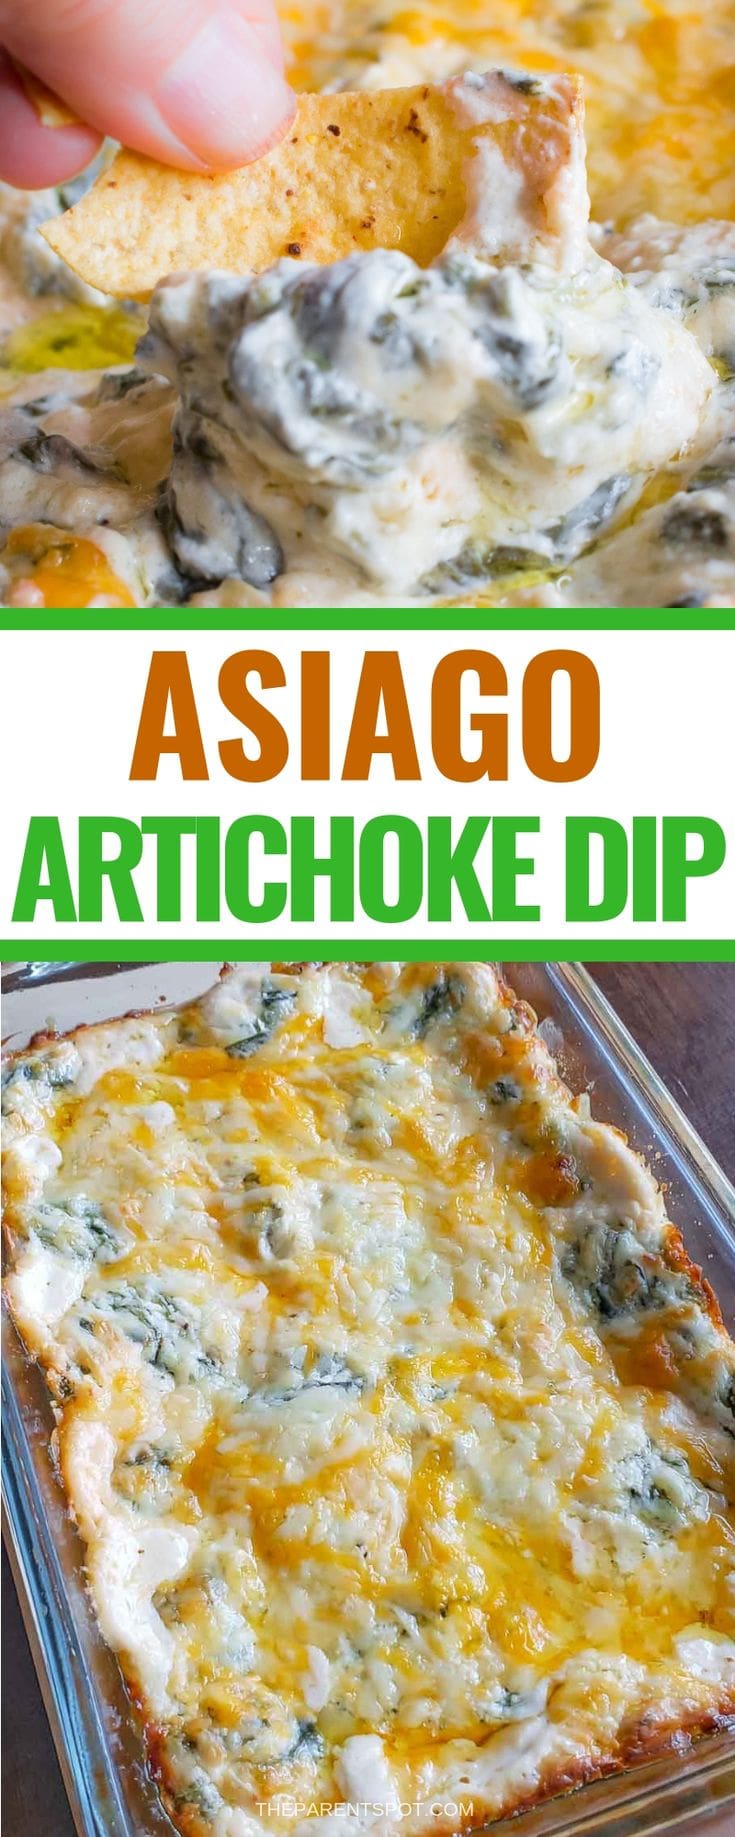 hot Asiago artichoke dip recipe baked with spinach 